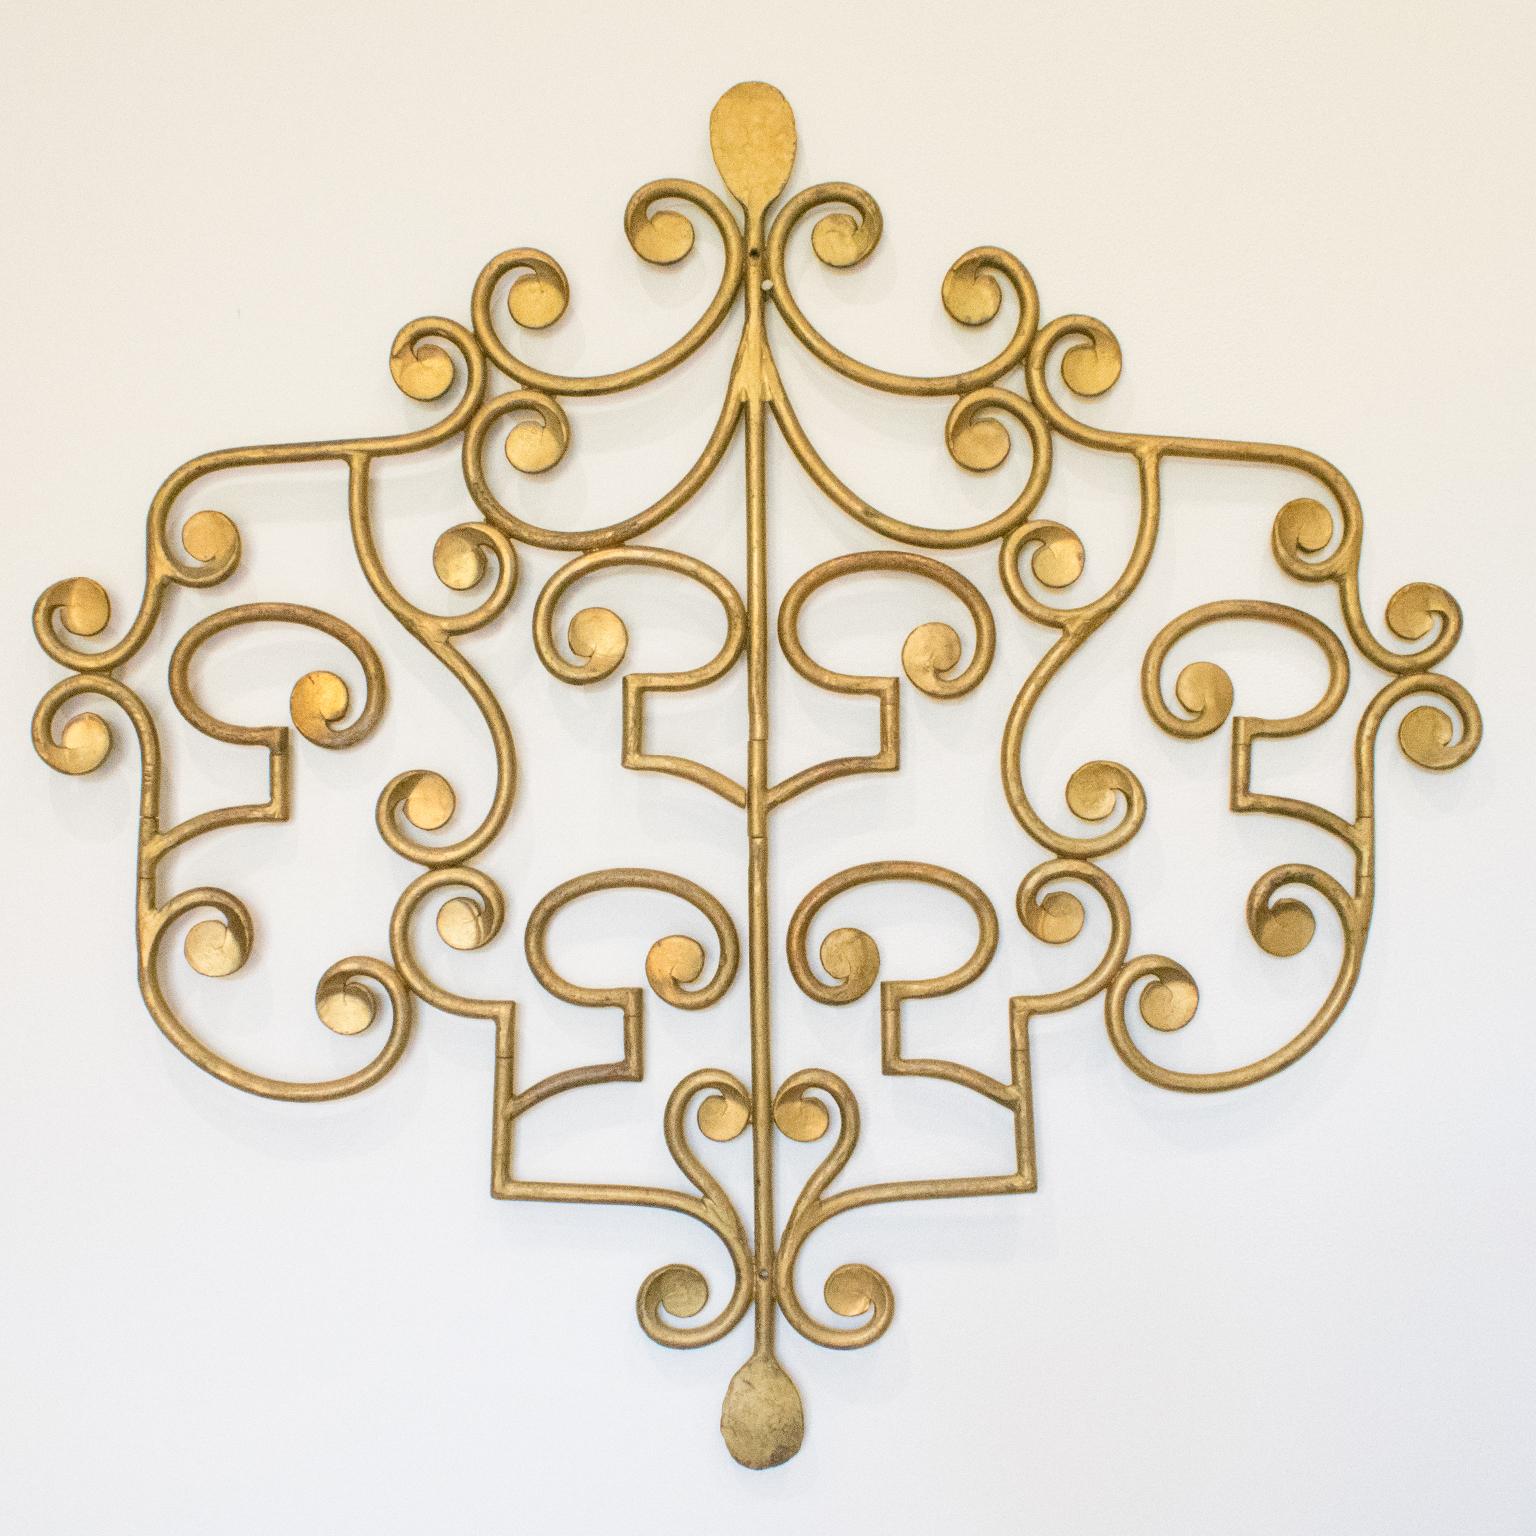 Stunning French wall-mounted gilt metal coat rack, hanger. Very unusual flat or raised shape. Lay it flat and this coat rack becomes a lovely wall metal sculpture, with fine detailing and high ornamental flair. You need it as a coat rack, just